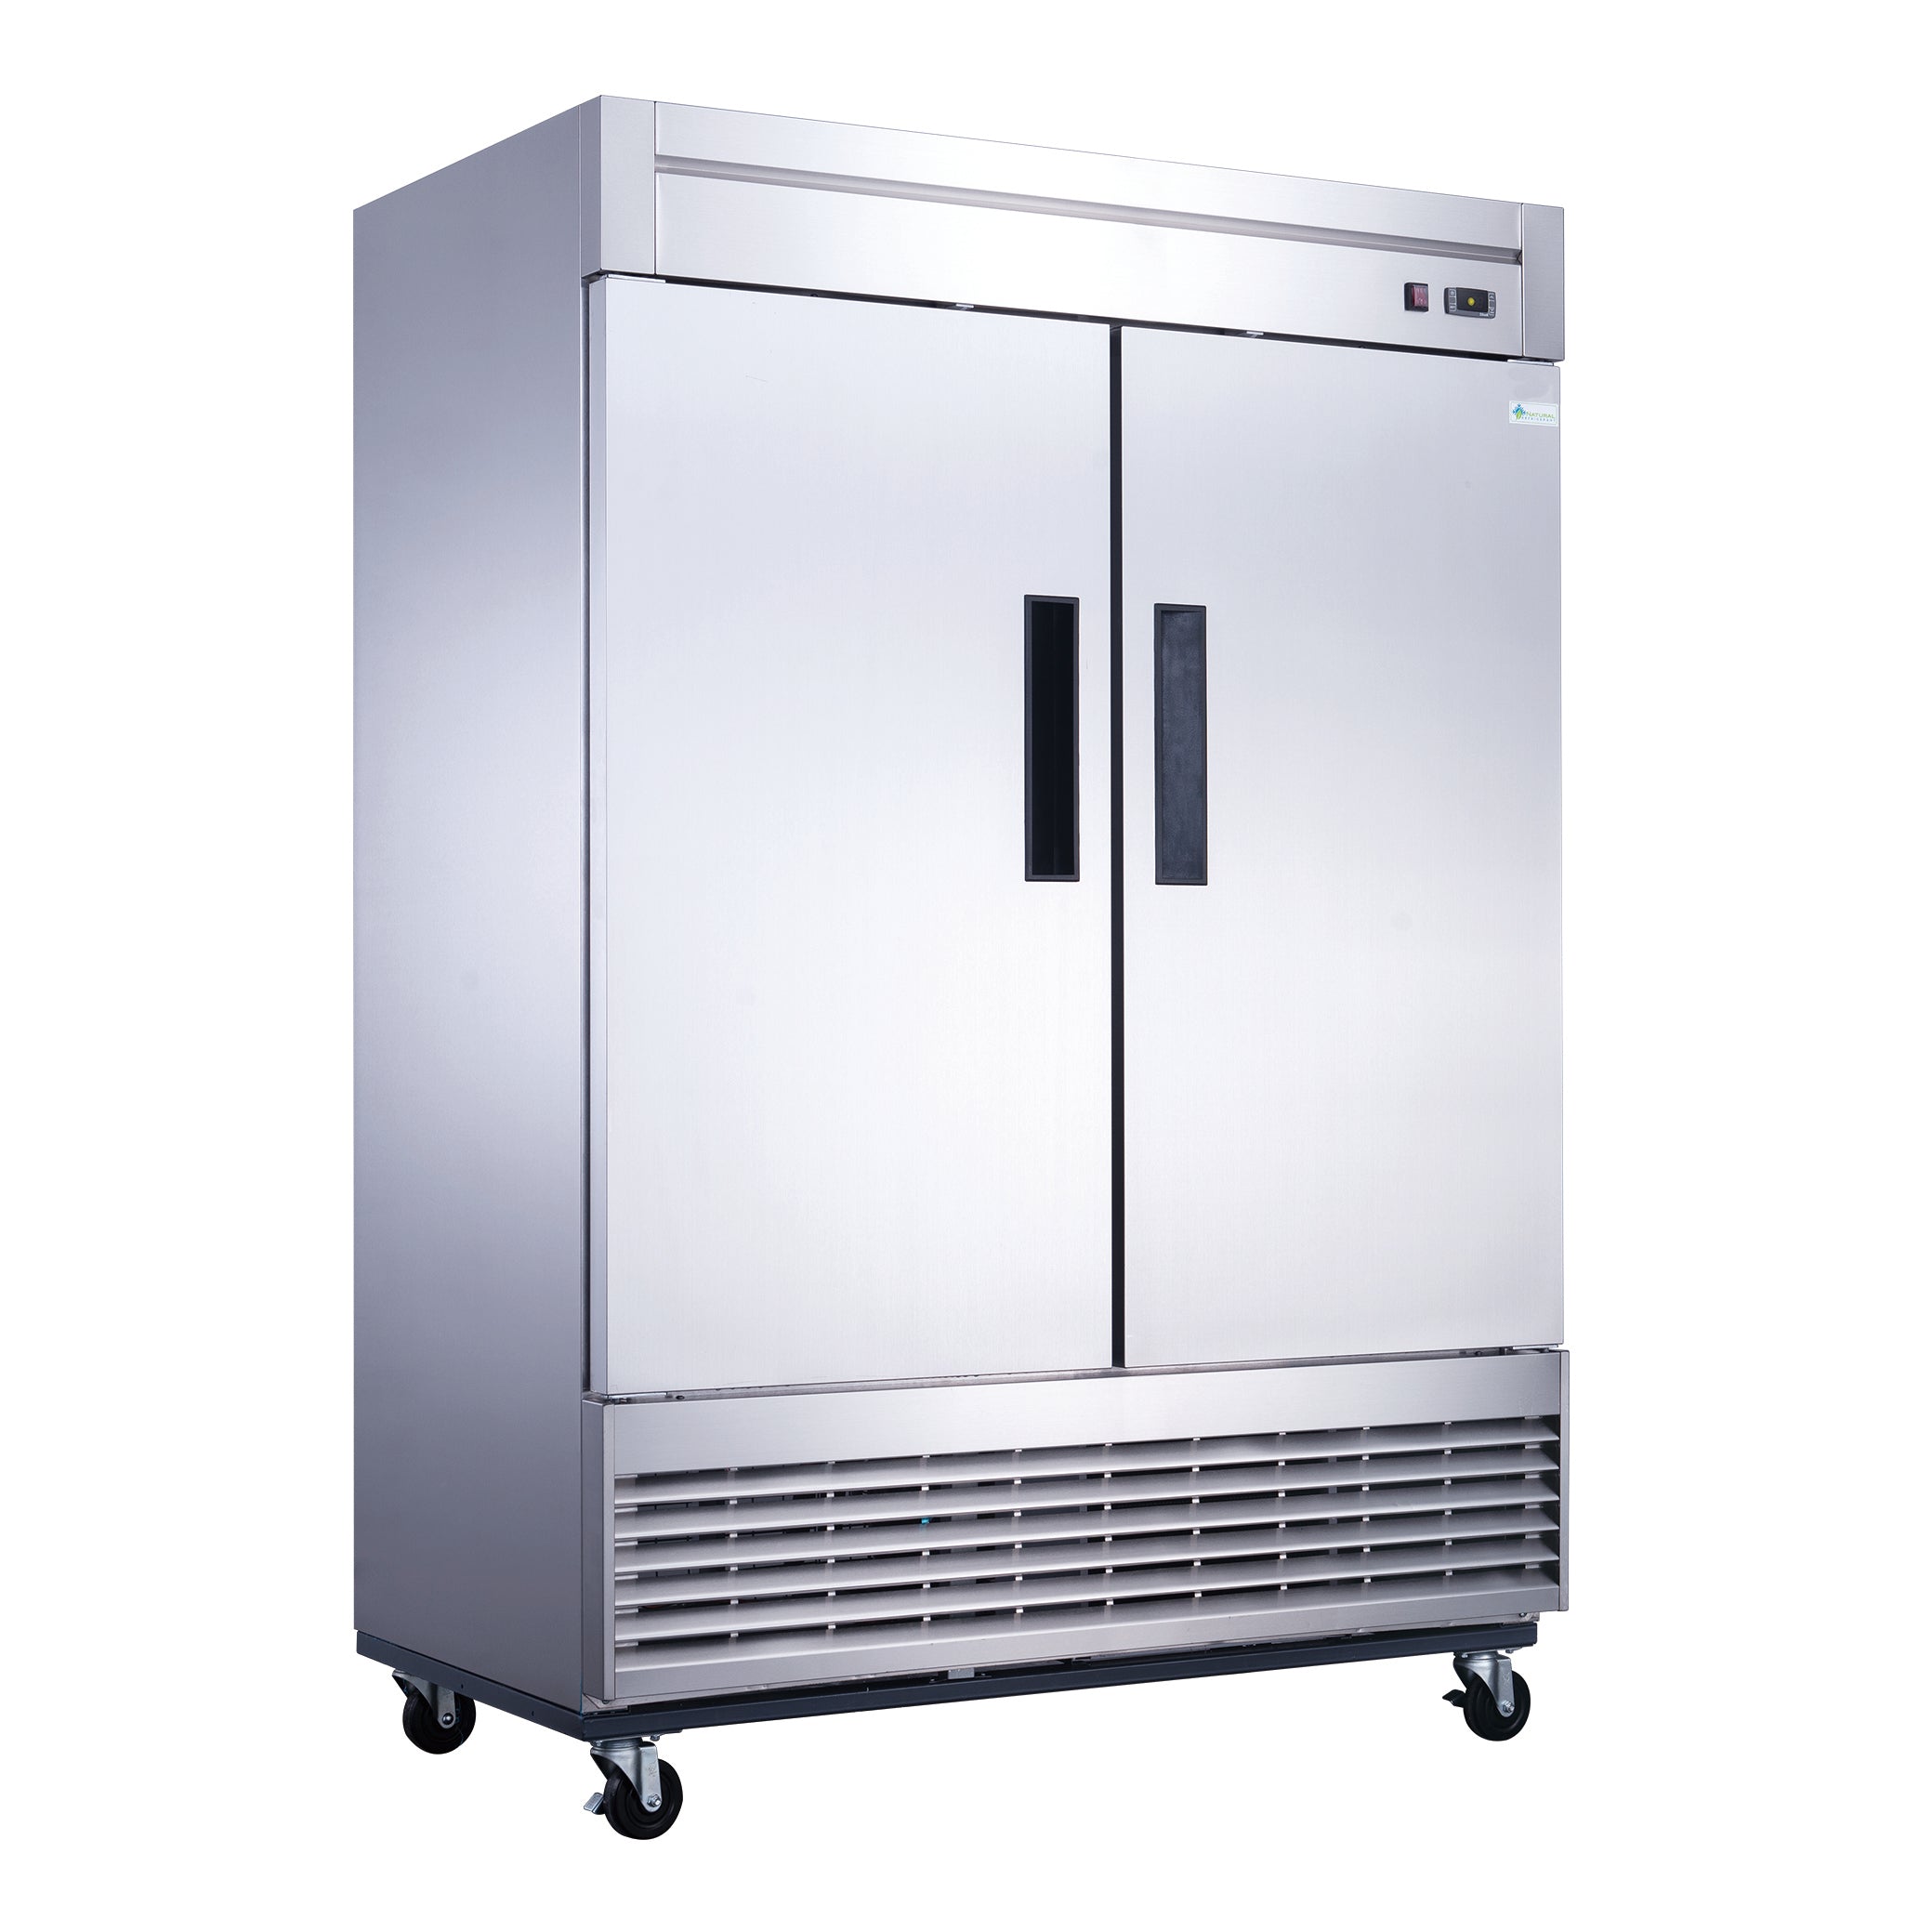 commercial-reach-in-refrigerator-commercial-kitchen-equipment-commercial-refrigerator